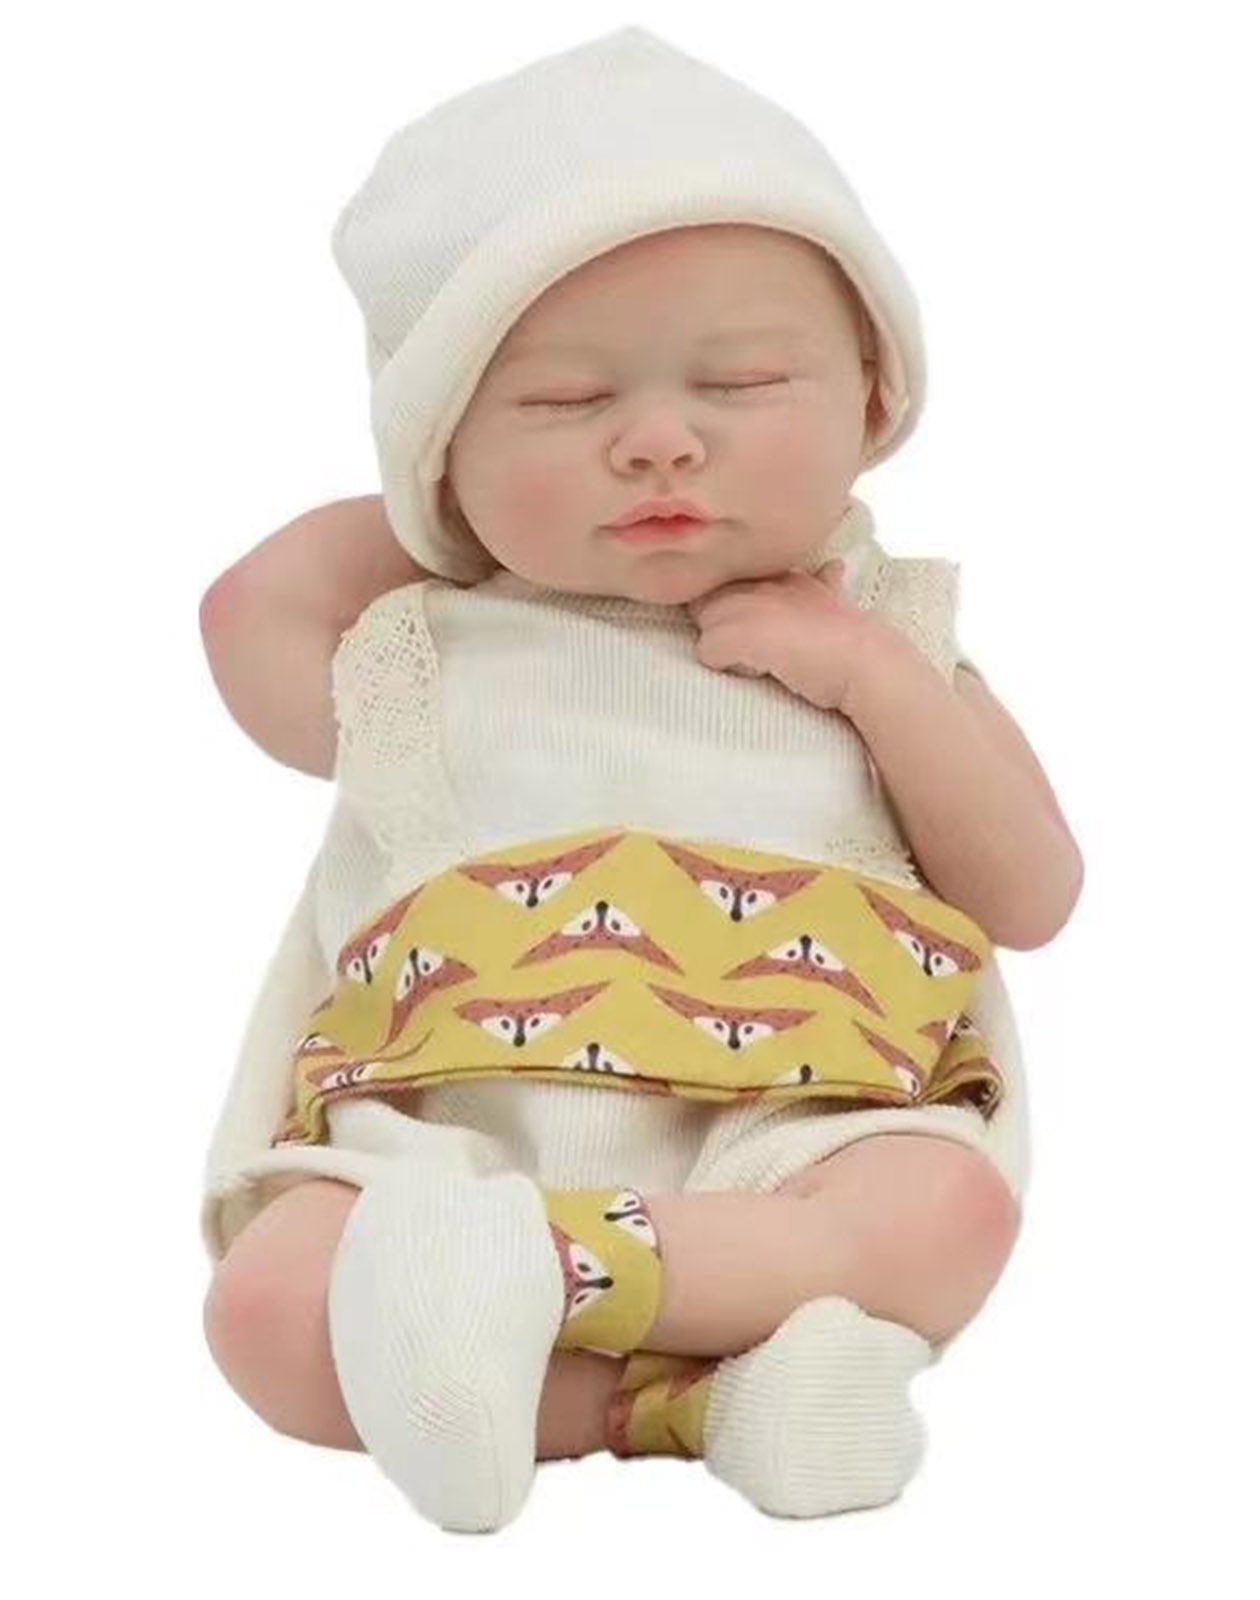 Margery - 18" Full Silicone Reborn Baby Dolls Platinum Silicone Real Newborn Girl with Sleeping Face